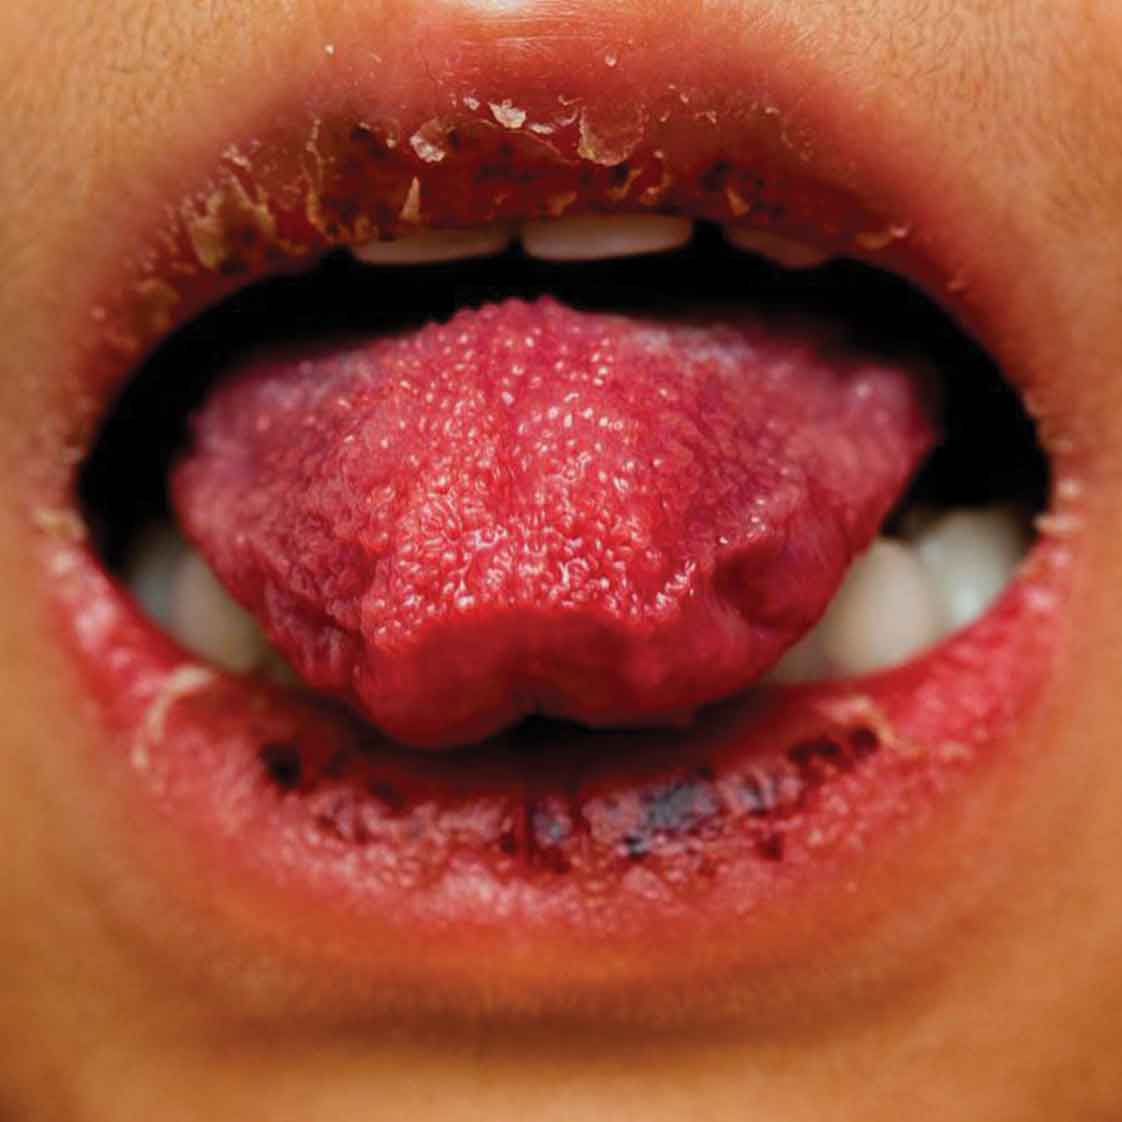 Strawberry Tongue Pictures, Images & Photos | Photobucket